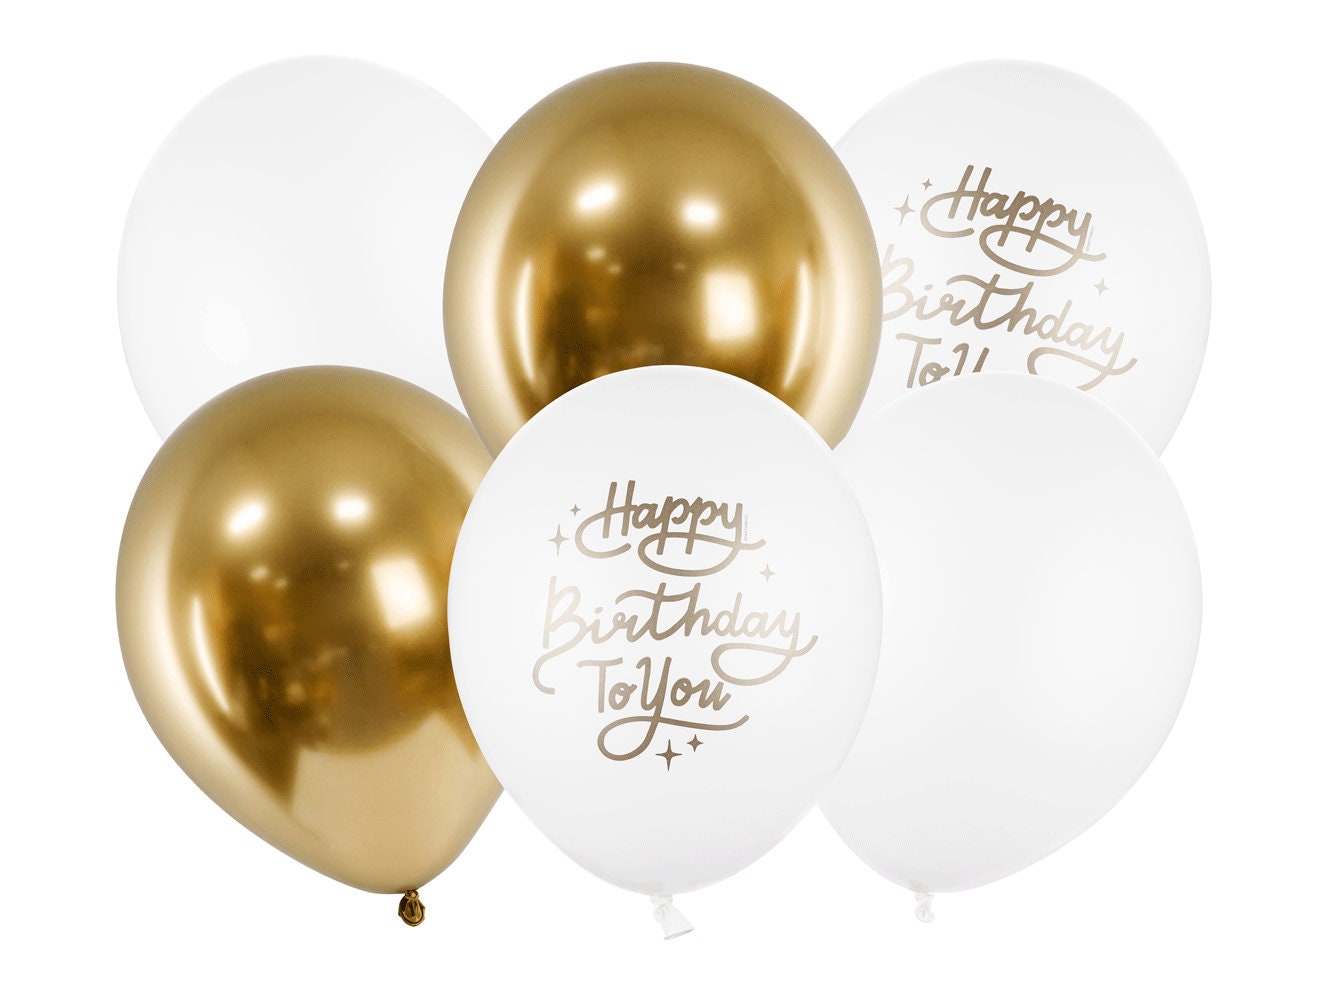 Gerich Brown Balloons, 30 Pcs 12 inch Latex Balloons, Party